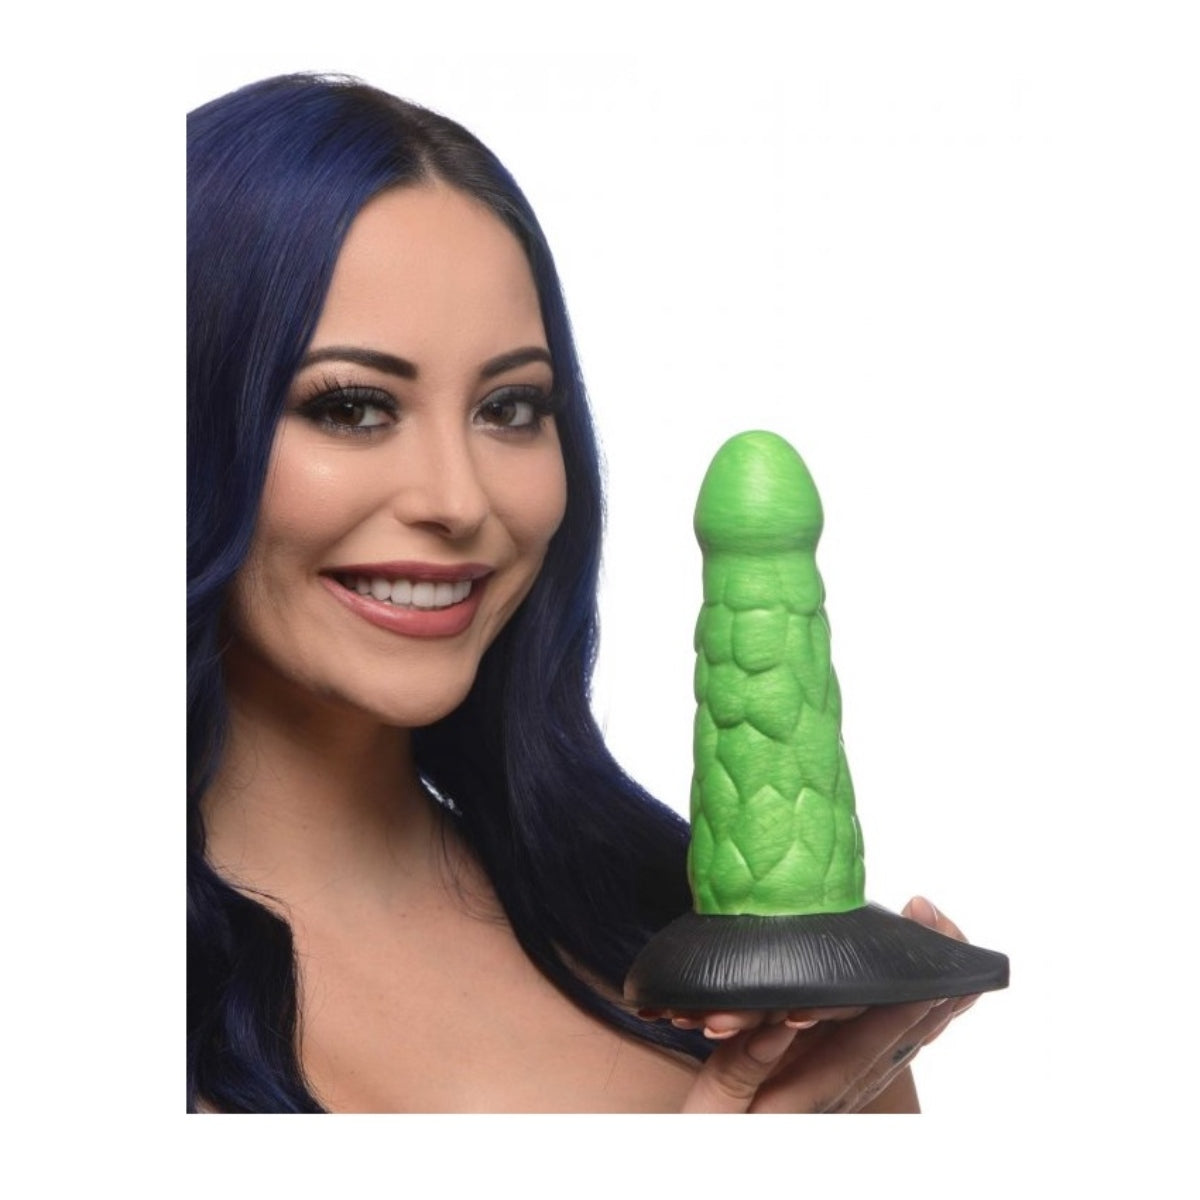 Female Model Holding Product - Creature Cocks Radioactive Reptile Thick Scaly Silicone Dildo Green - Simply Pleasure